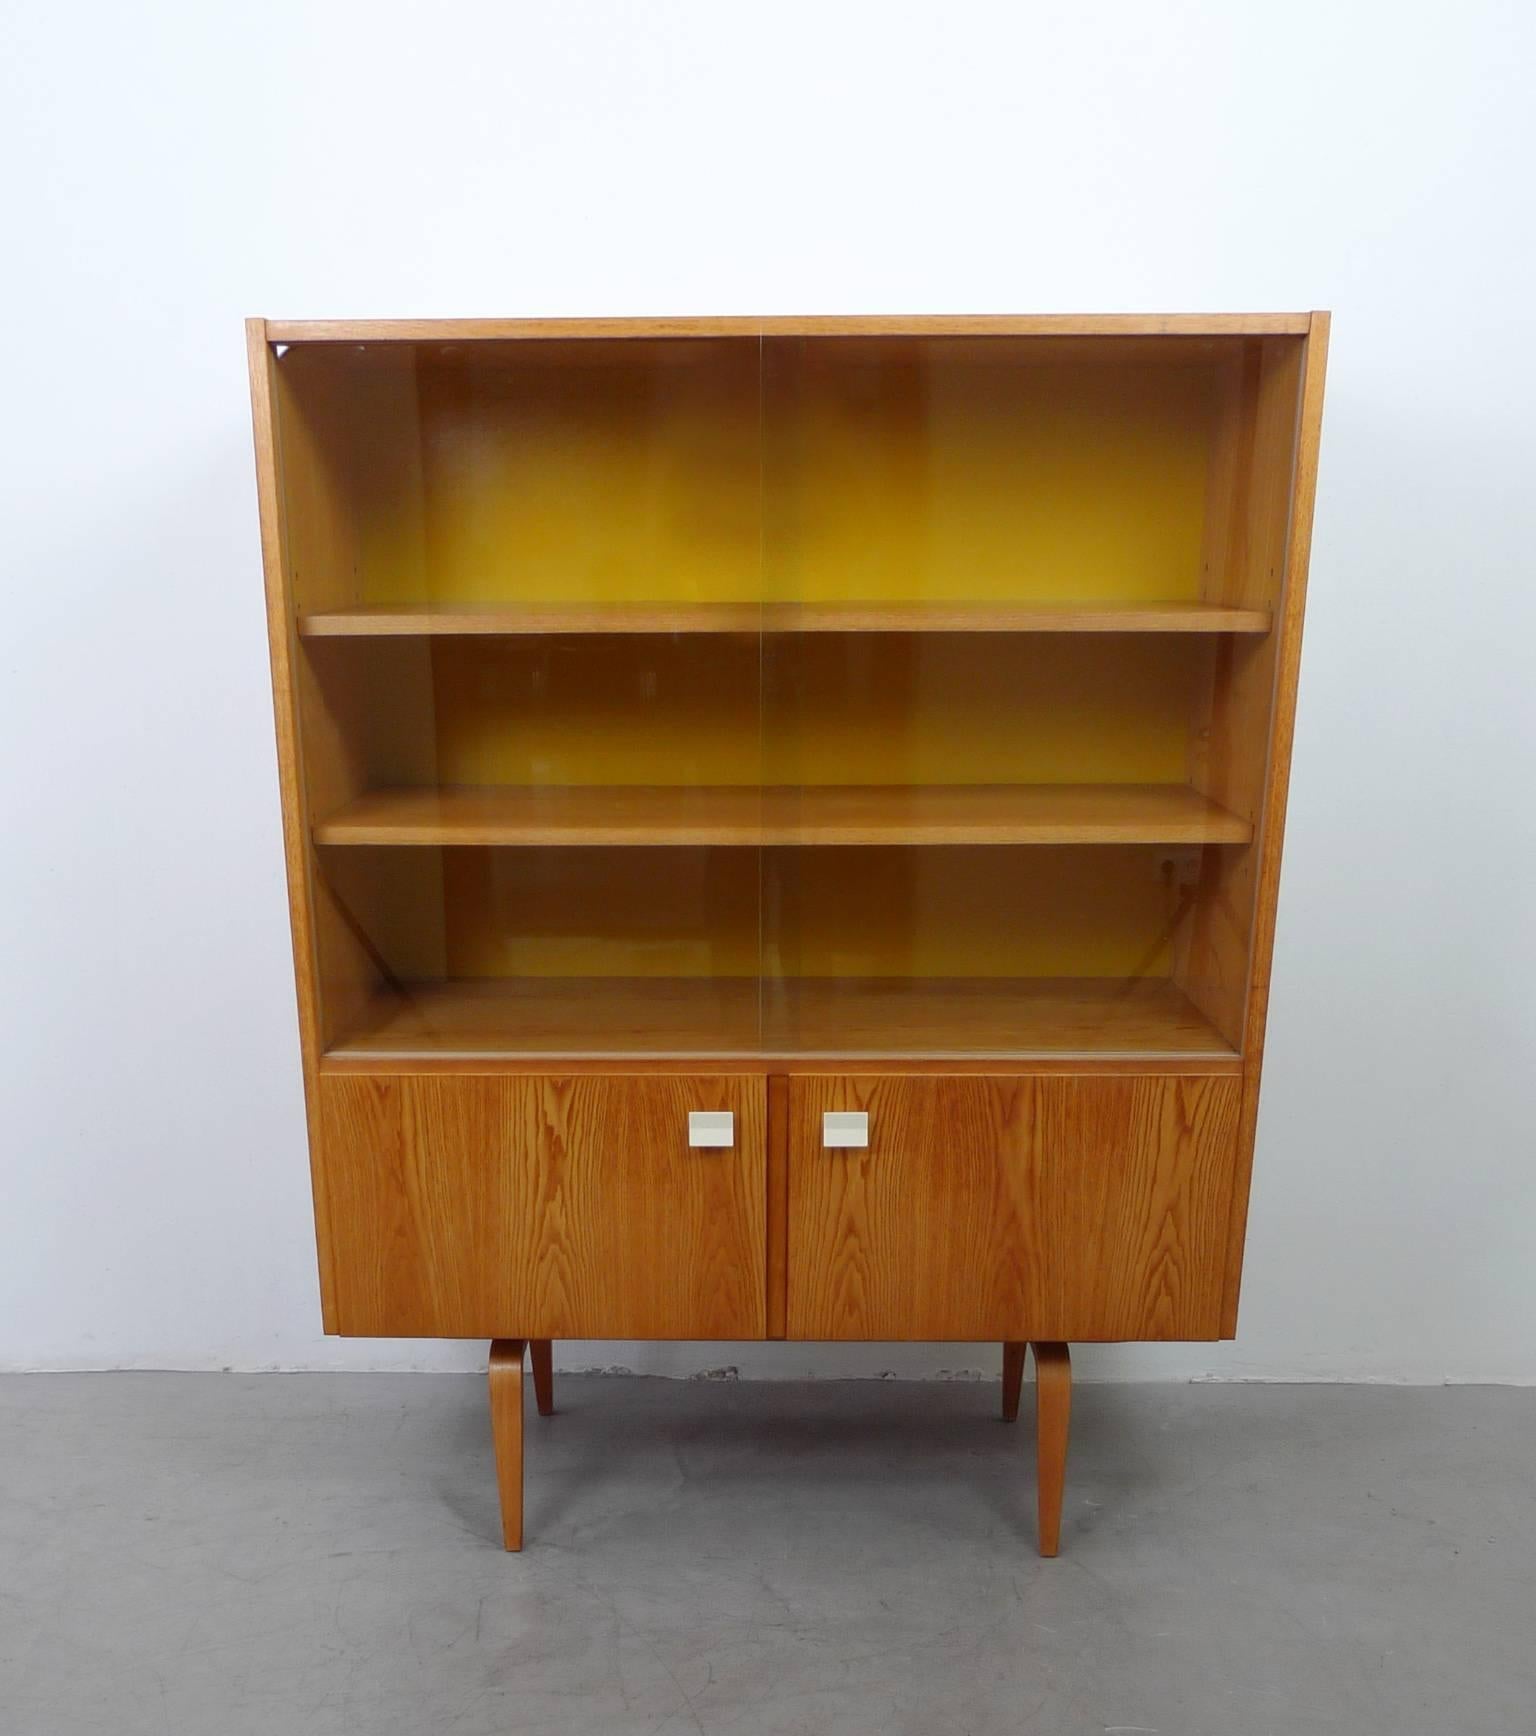 1960s display cabinet with two glass sliding doors and two folding doors from Deutsche Werkstätten Hellerau. This bookcase is part of the Möbelserie 427 designed by Franz Ehrlich in 1964.
The bookcase is in very good original condition, only the